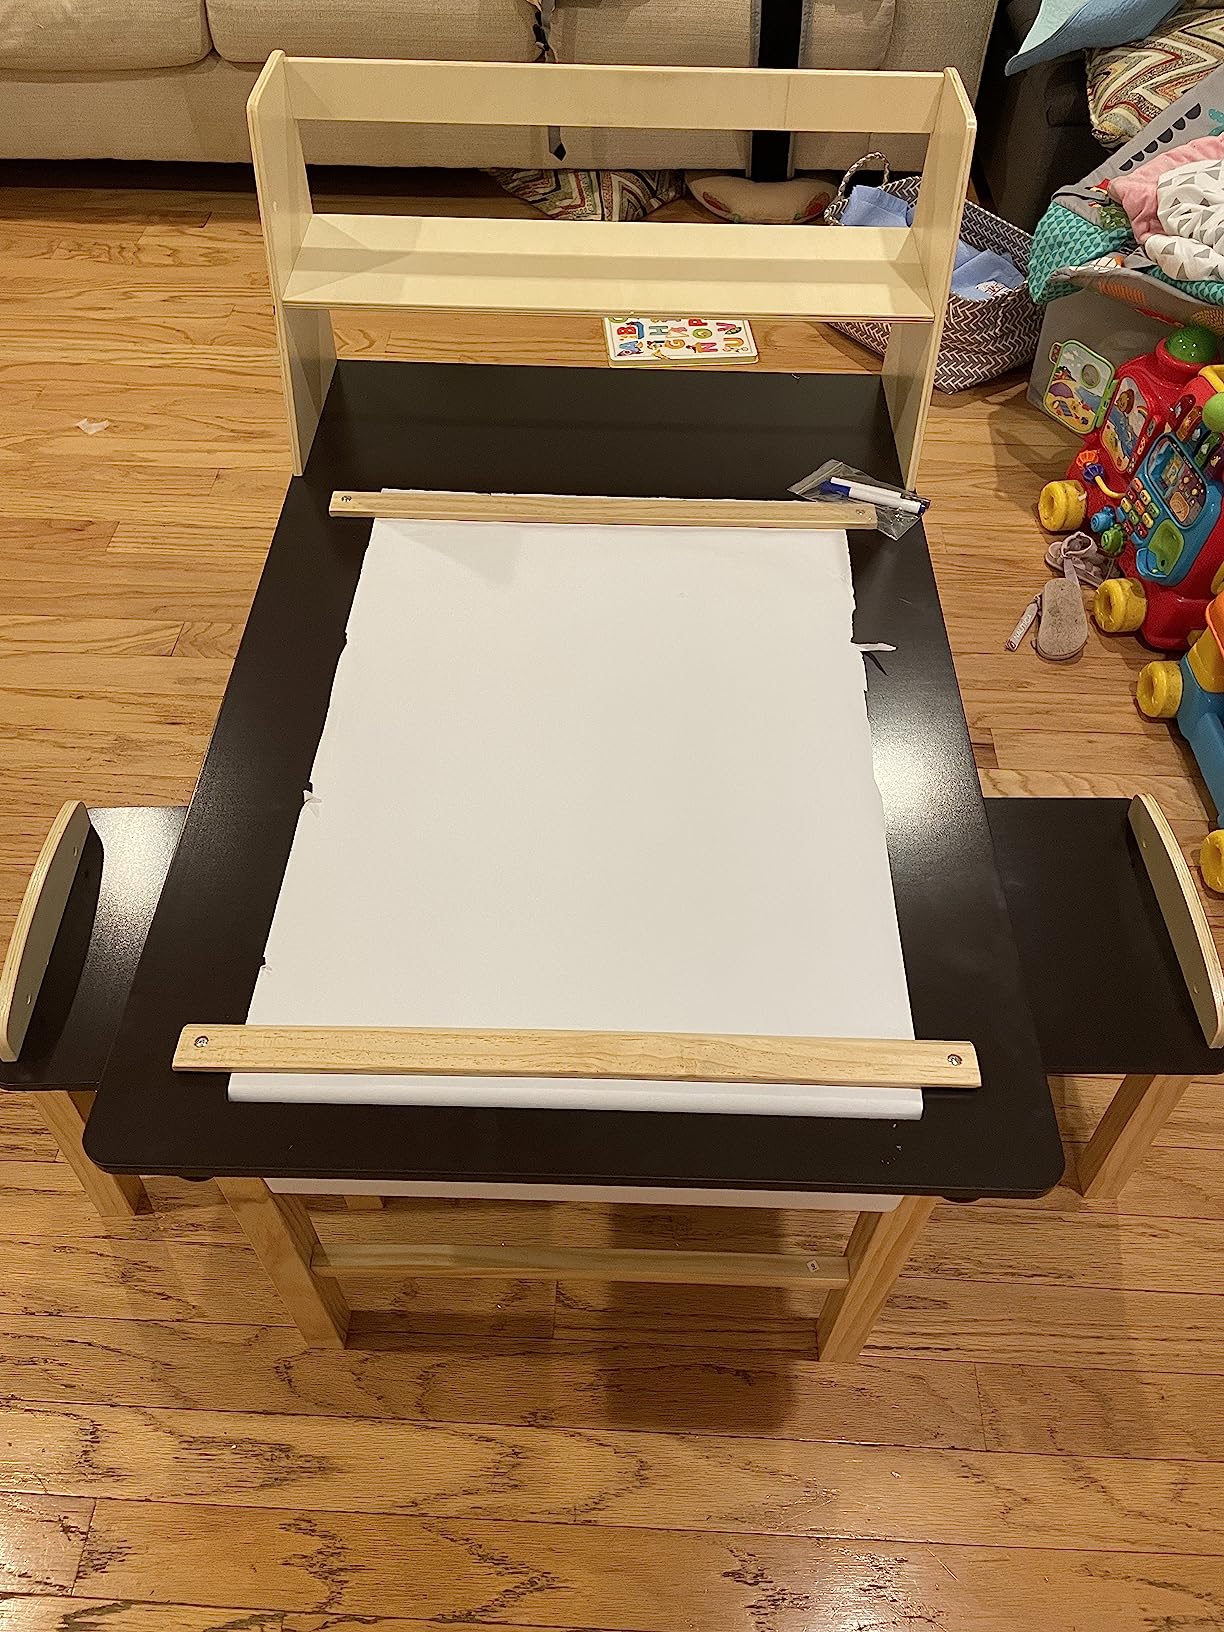 Costway Kids Art Table & Chairs Set Wooden Drawing Desk with Paper - See Details - Coffee + Natural